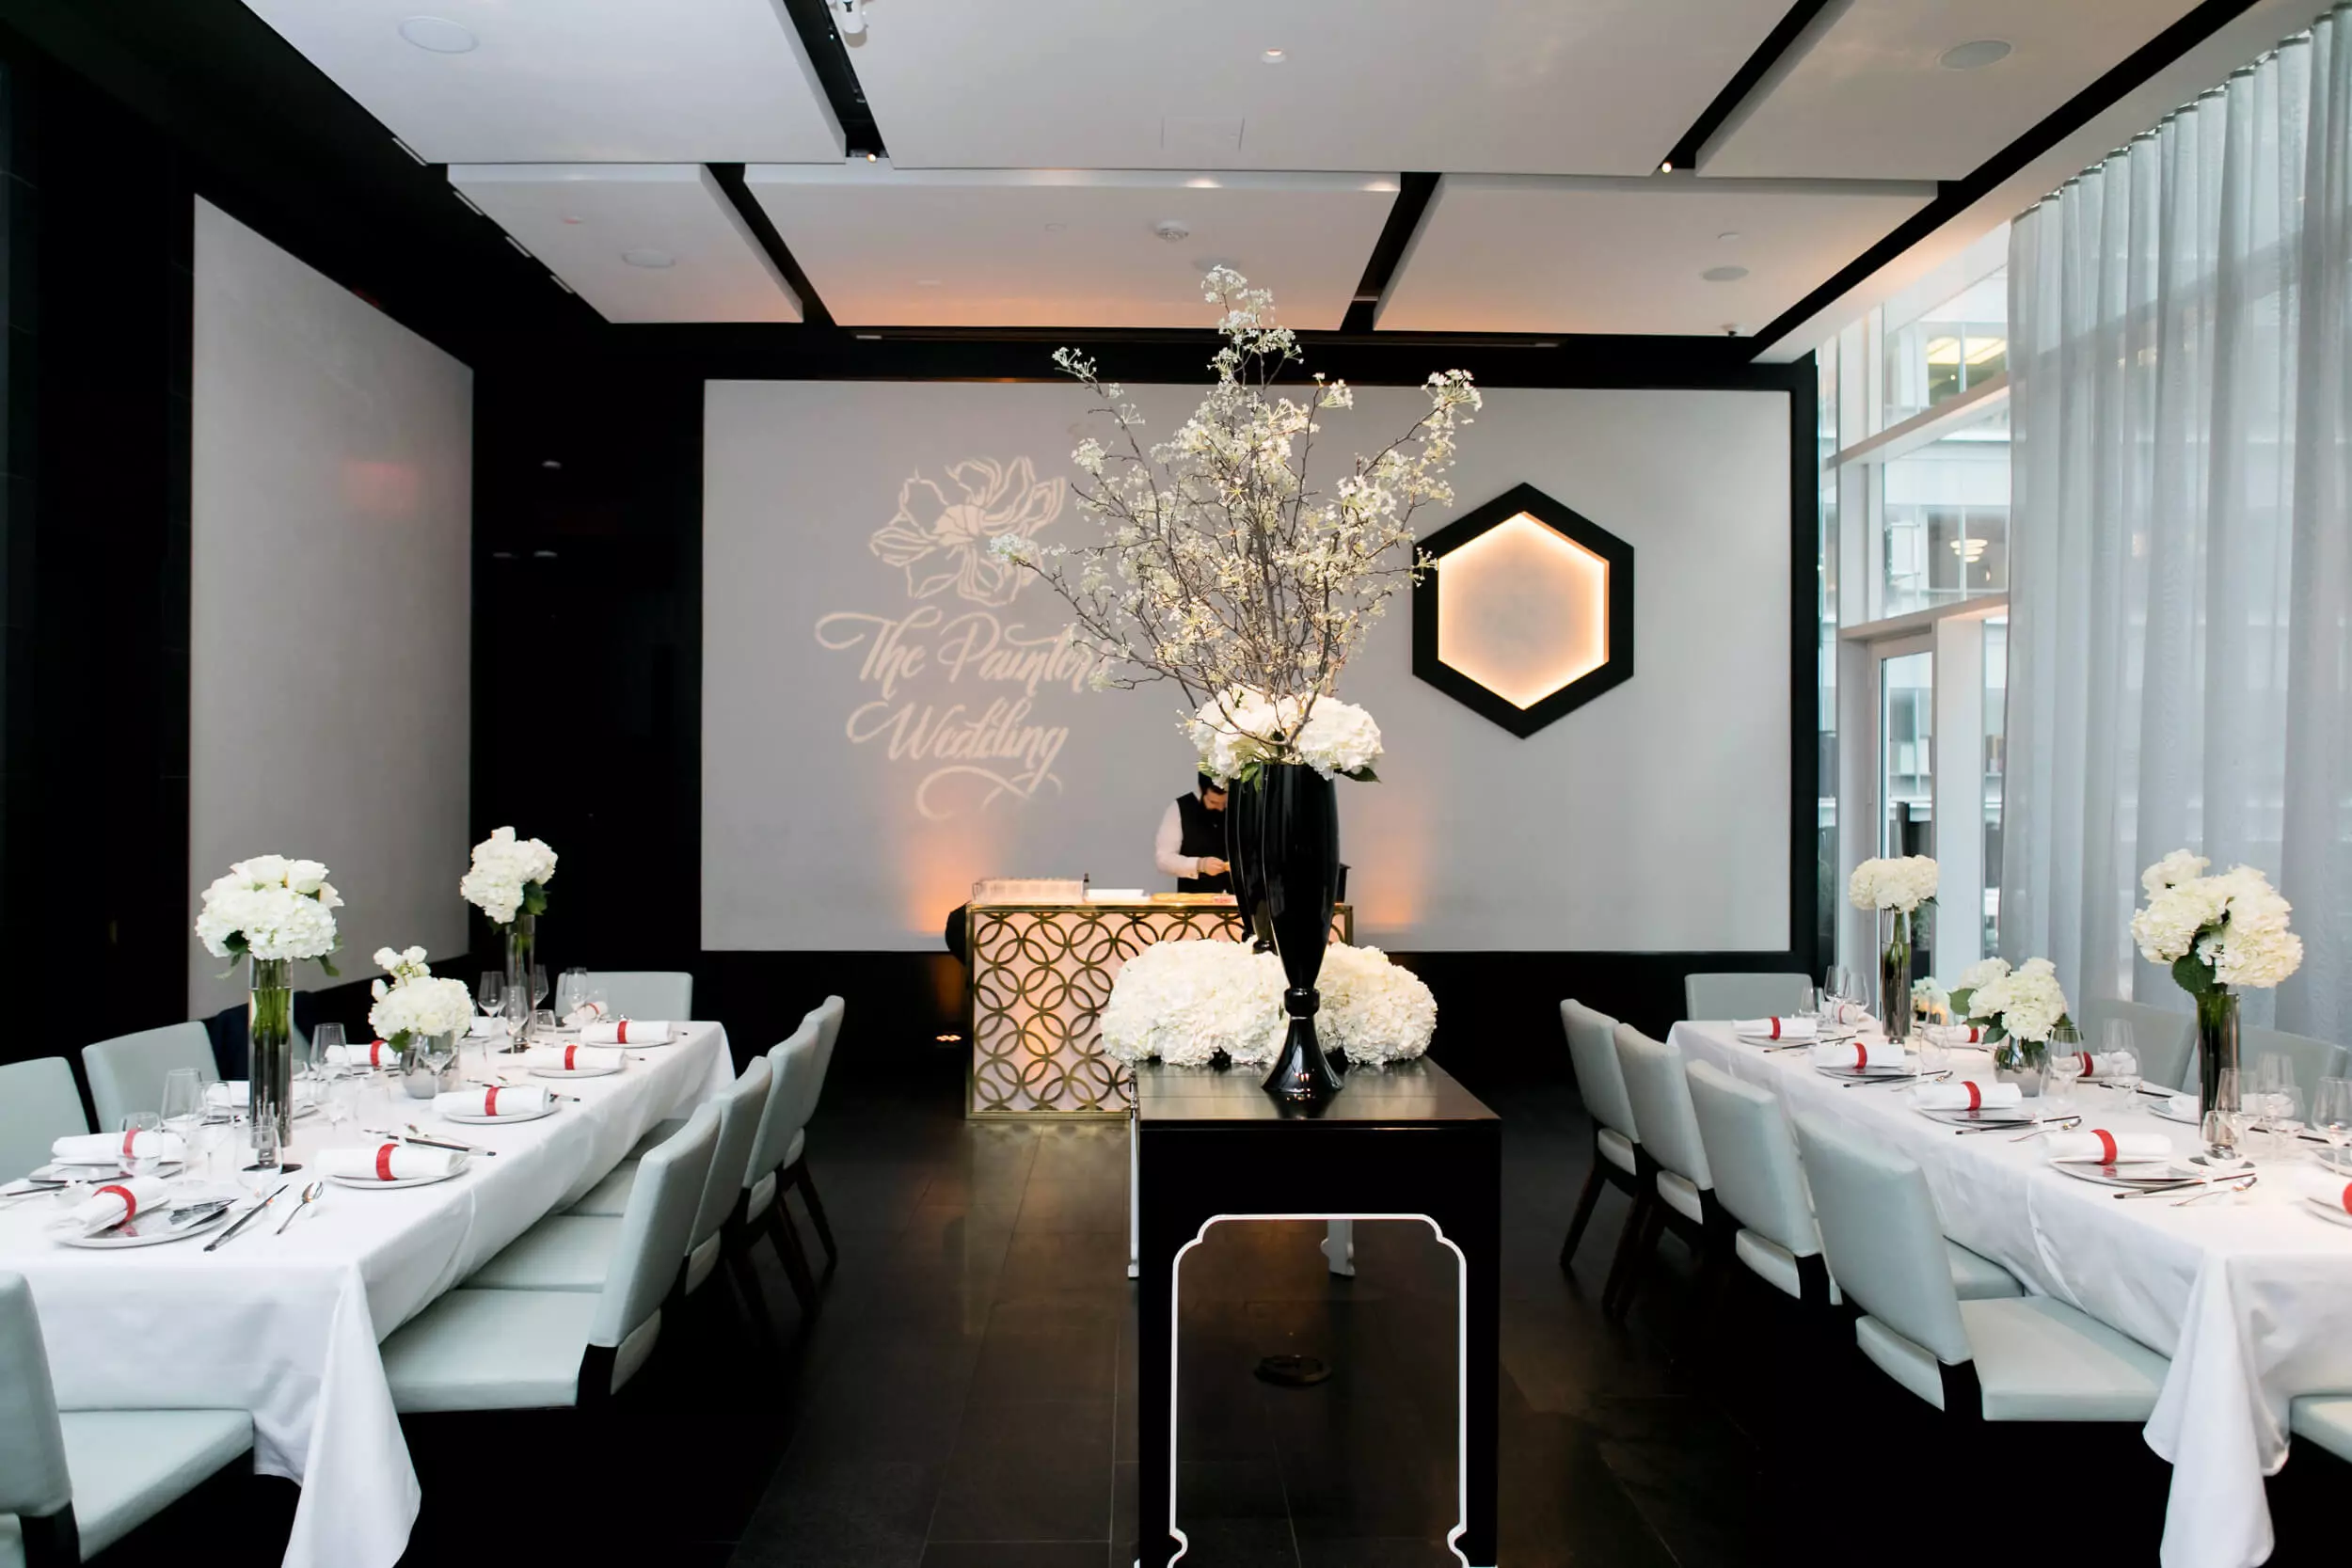 The Painter's Wedding book launch event in New York, intimate event venue